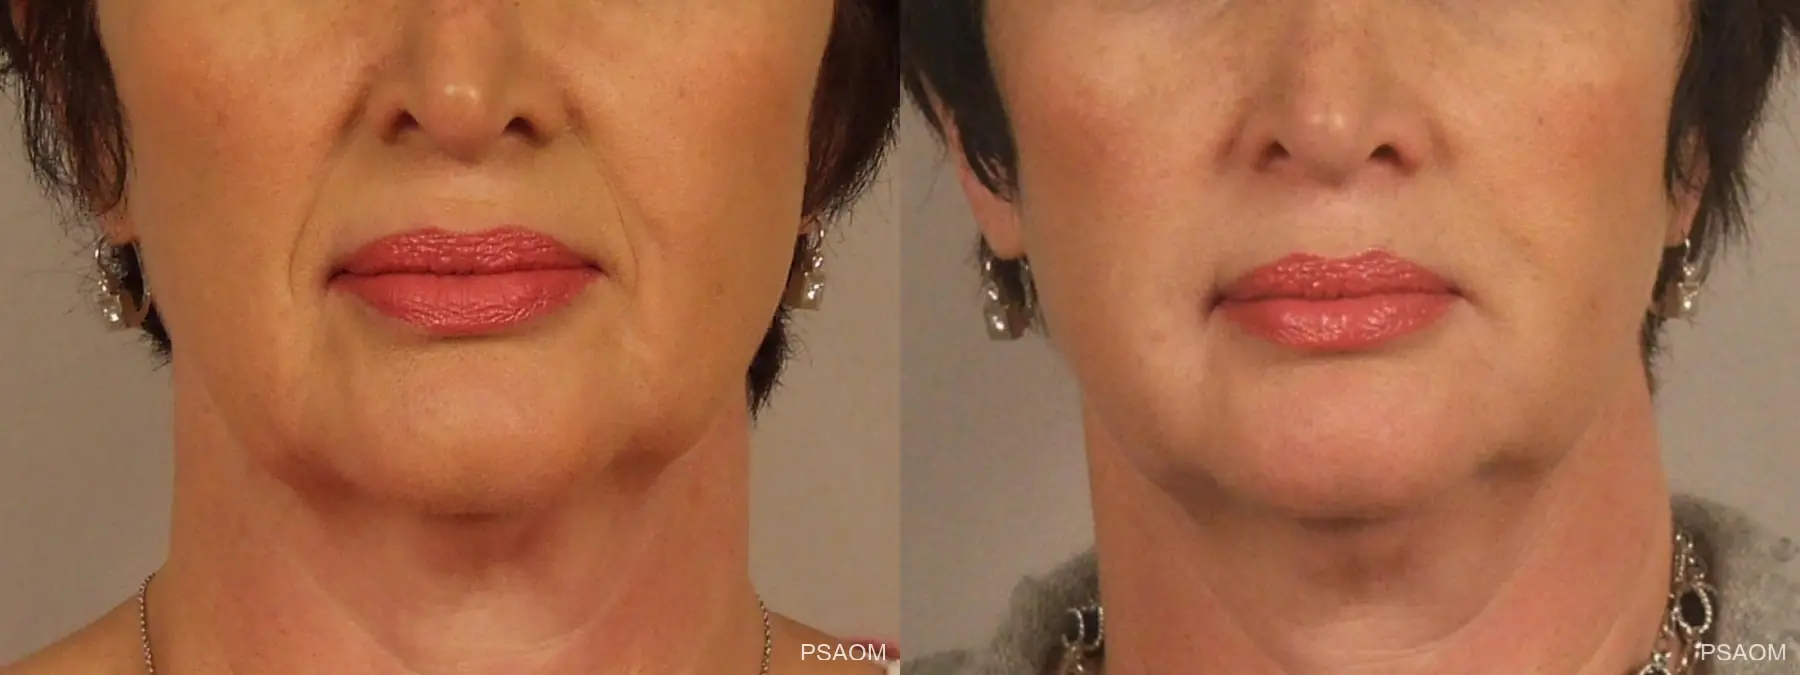 Injectables - Face: Patient 1 - Before and After 1